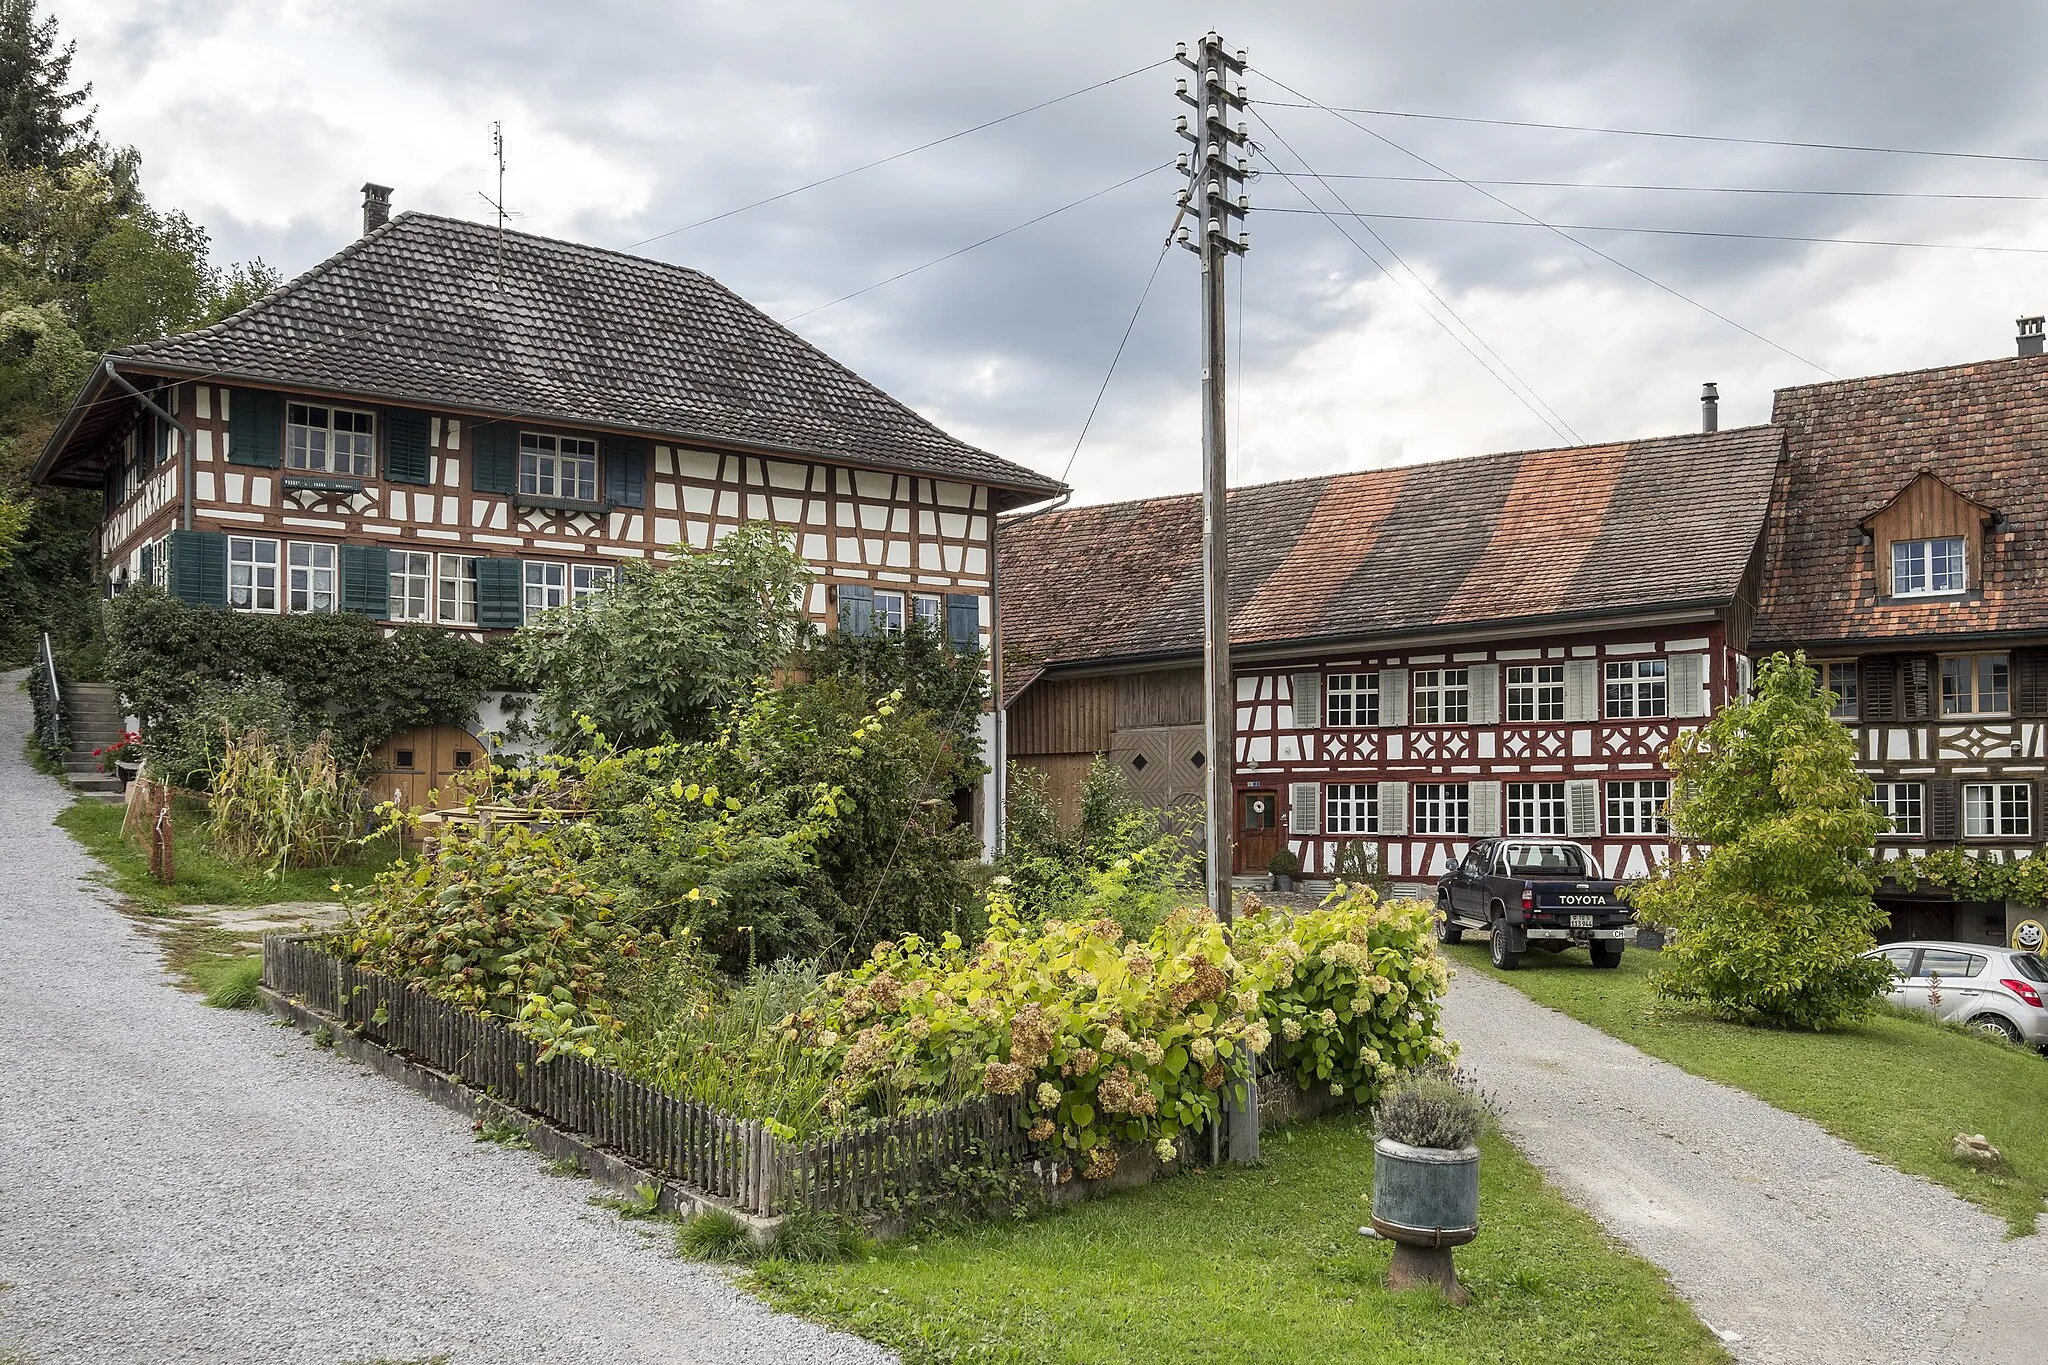 Photo showing: Amlikon, Klösterli 1, 3 und 5: timber framed houses of the 18th/19th century.